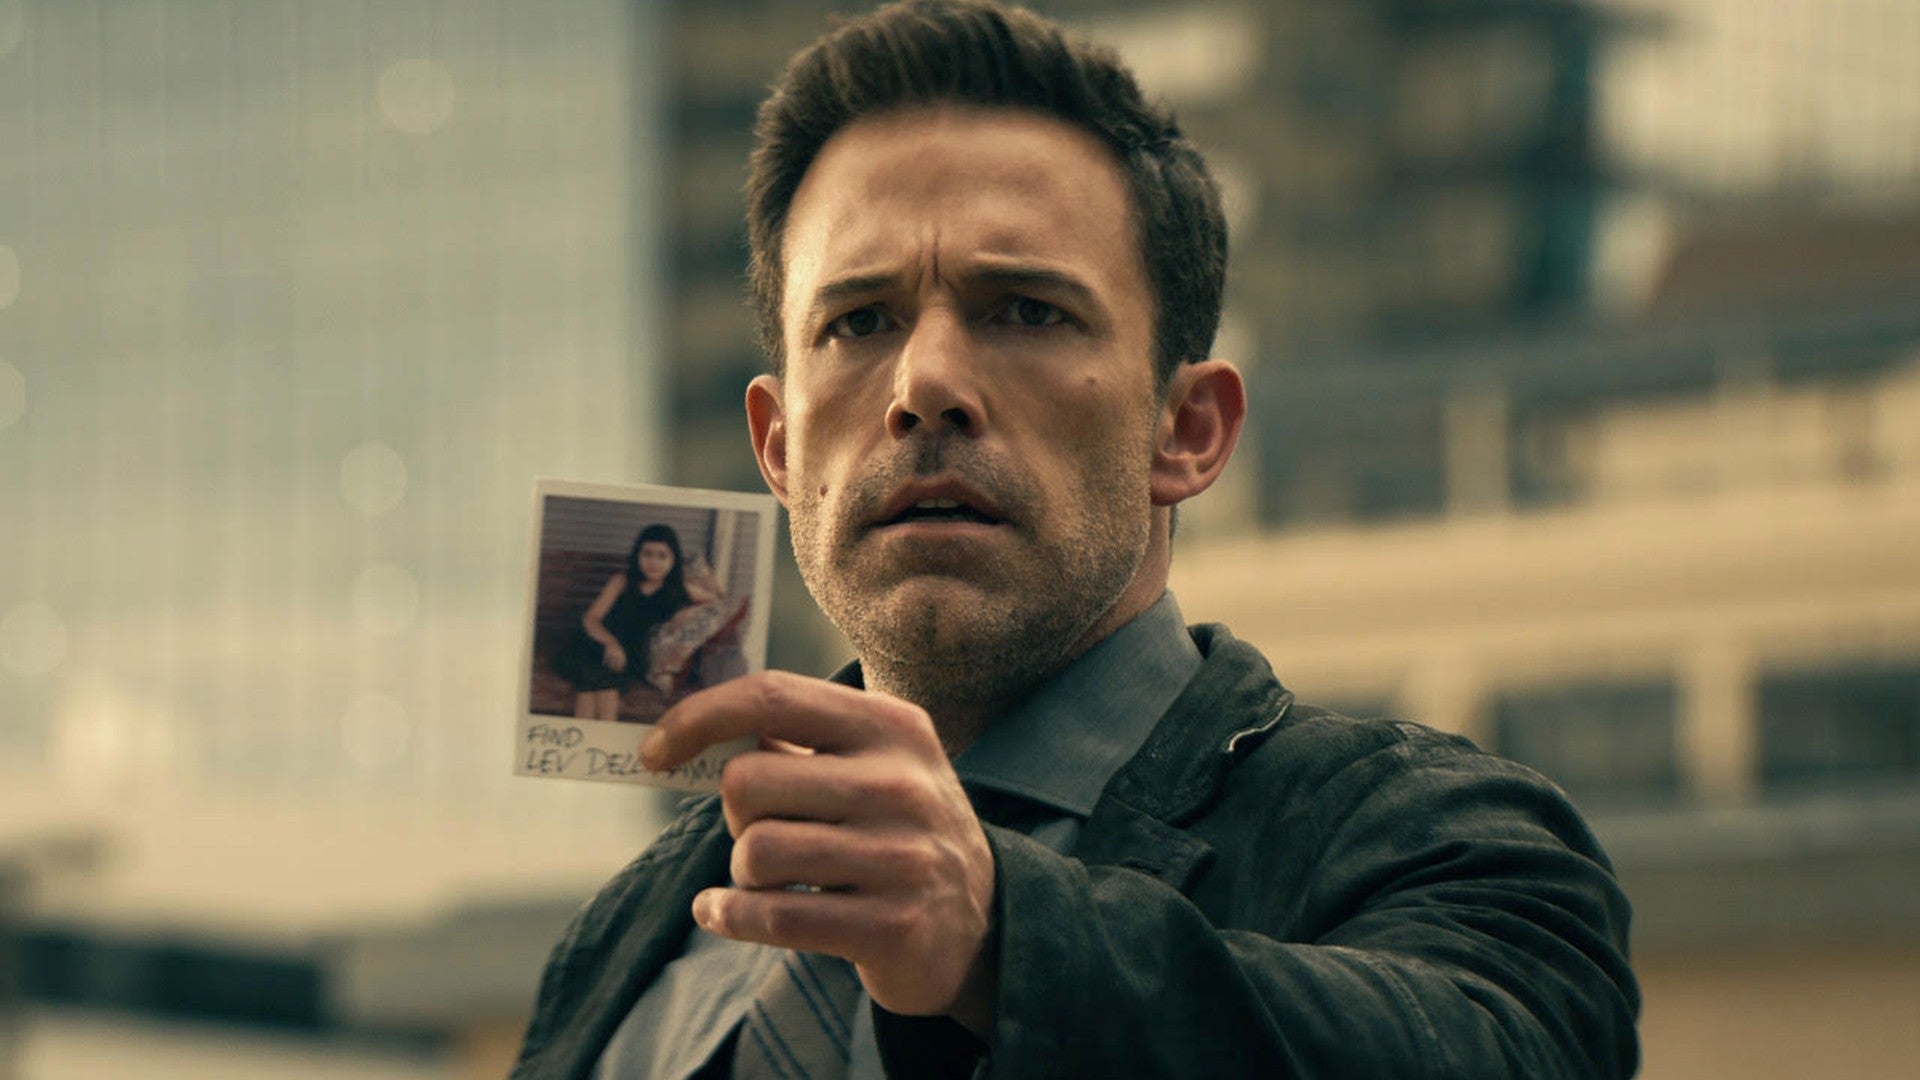 Review: ‘Hypnotic’Ben Affleck And Robert Rodriguez's Mindbending Crime Film Gives The Illusion Of Being 'Inception'-Esque